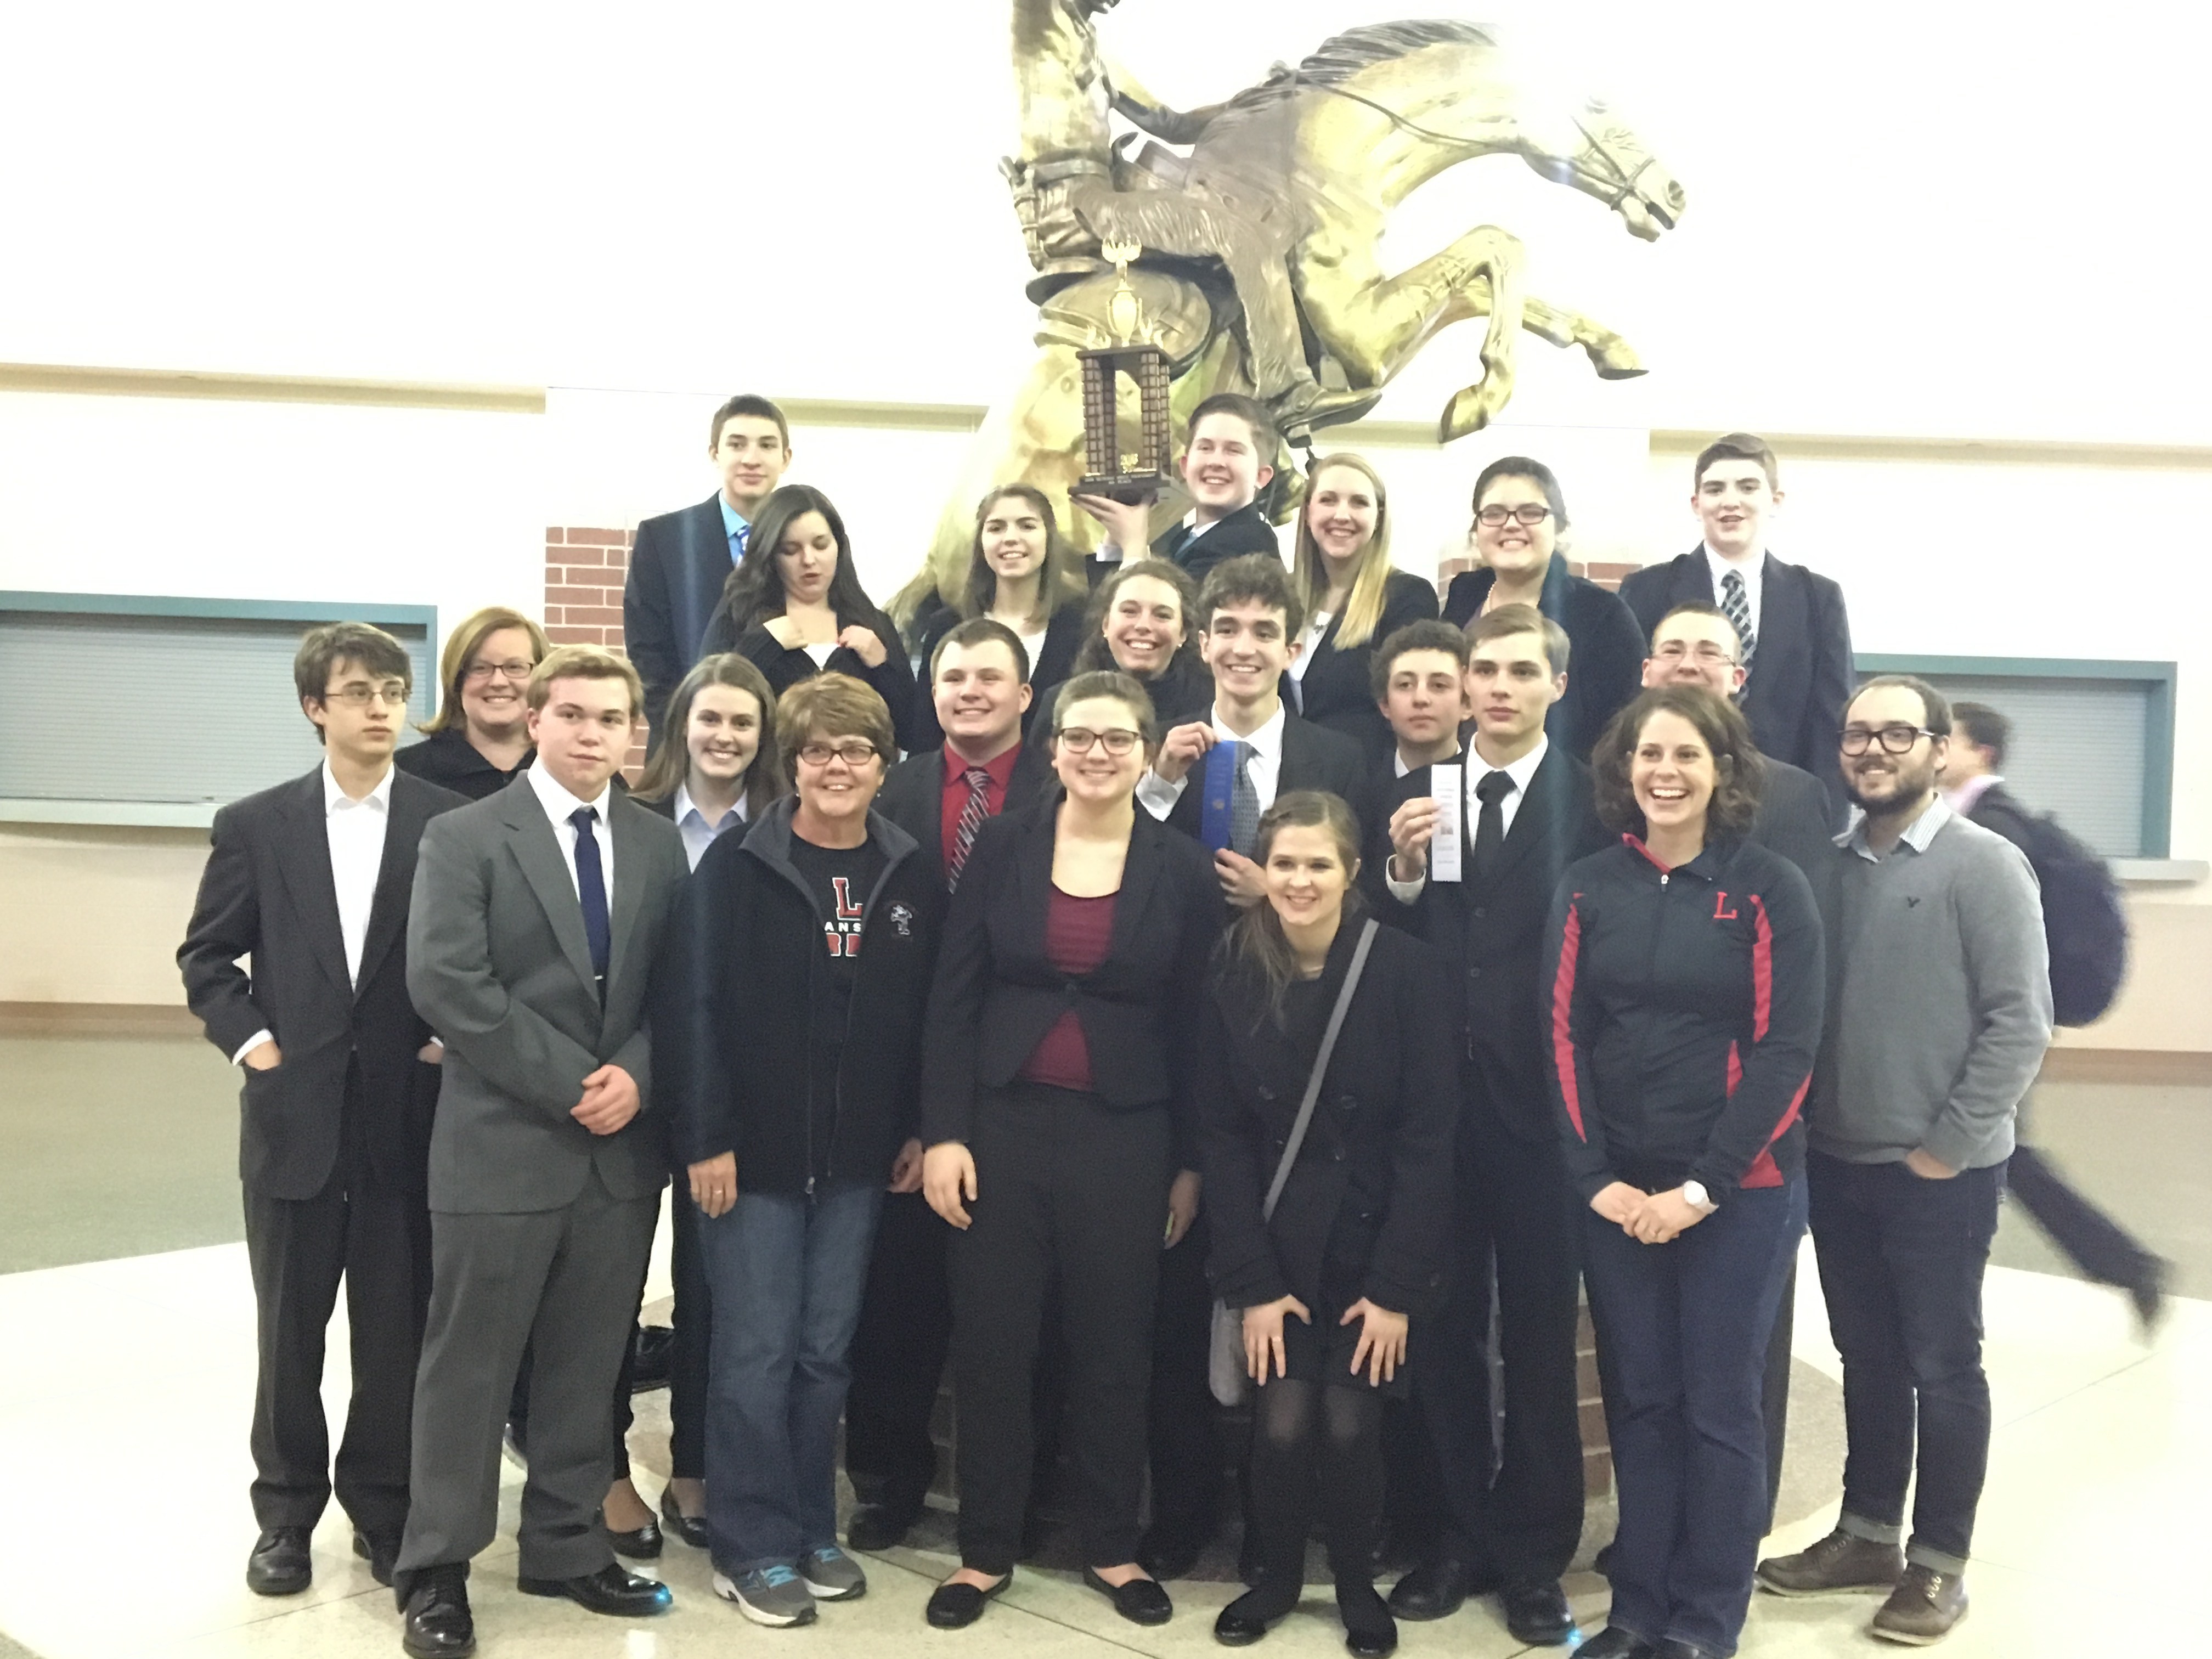 Thumbnail for the post titled: Logansport HS Speech Team places 4th at Sectionals